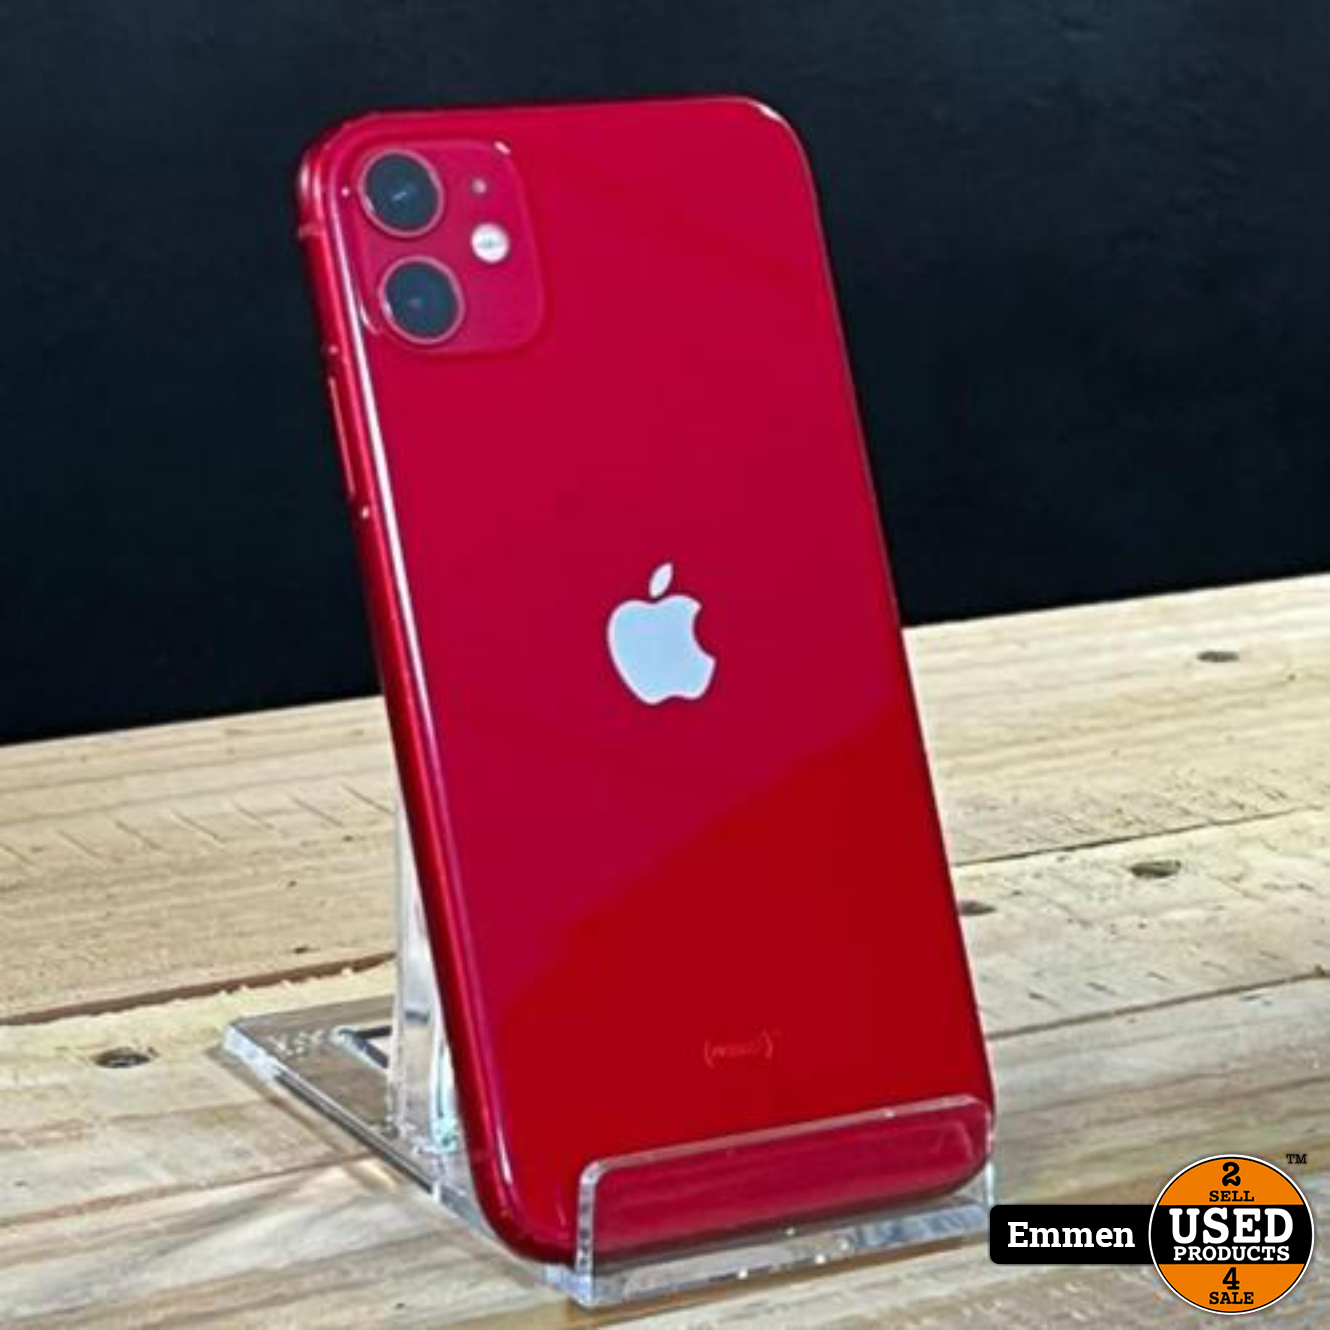 Iphone 11 128gb Red Incl Garantie Used Products Emmen